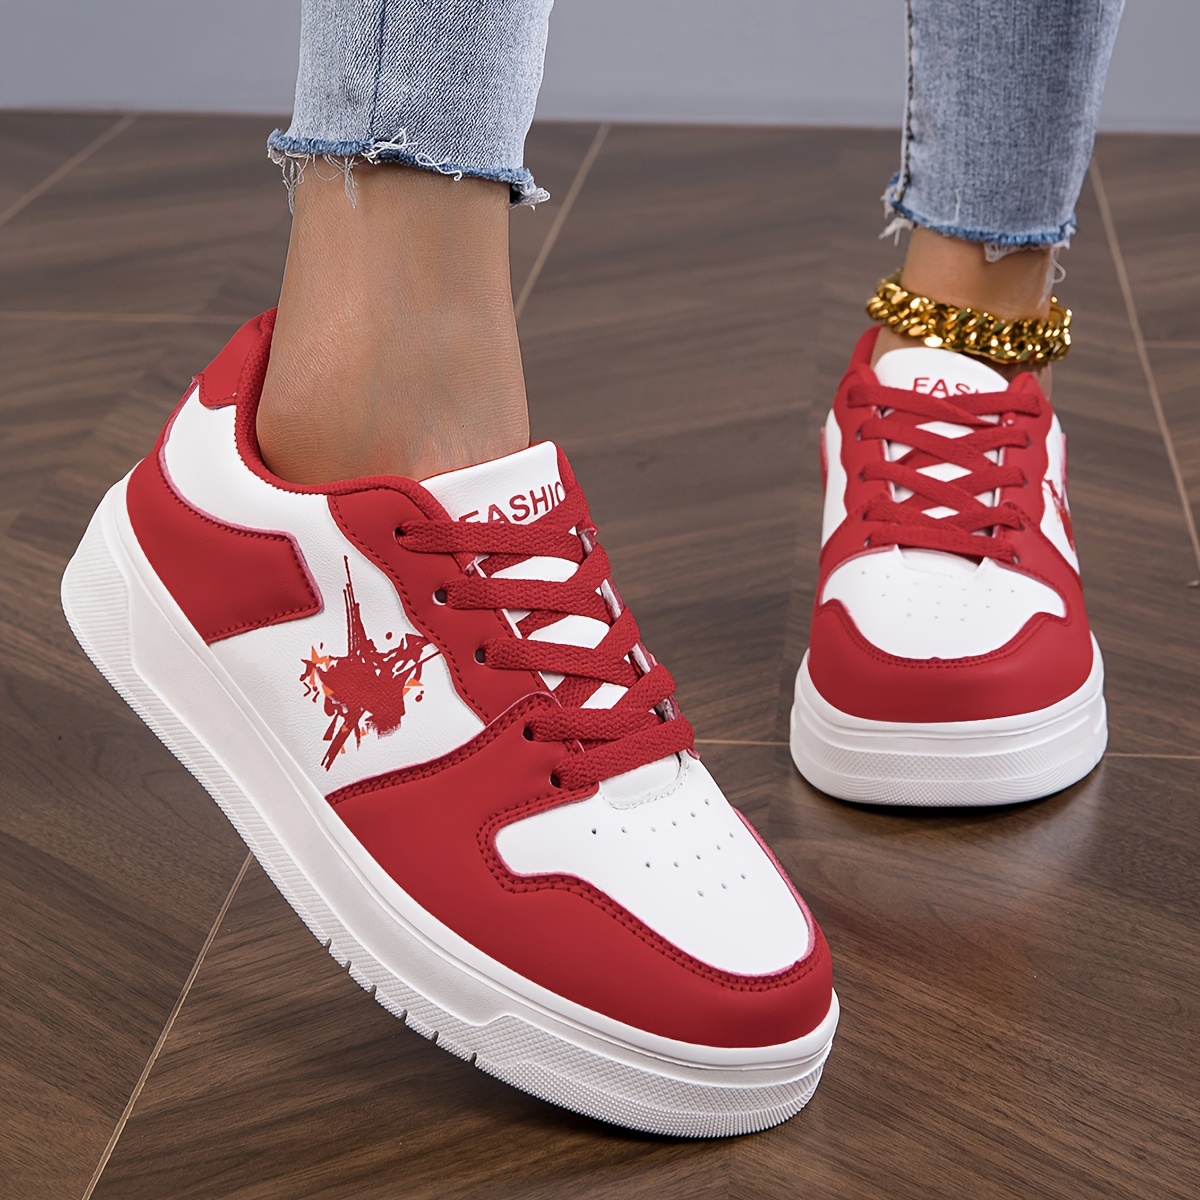 

Women's Fashion Sneakers, Chunky Platform, Casual Sports Skate Shoes, Faux Leather